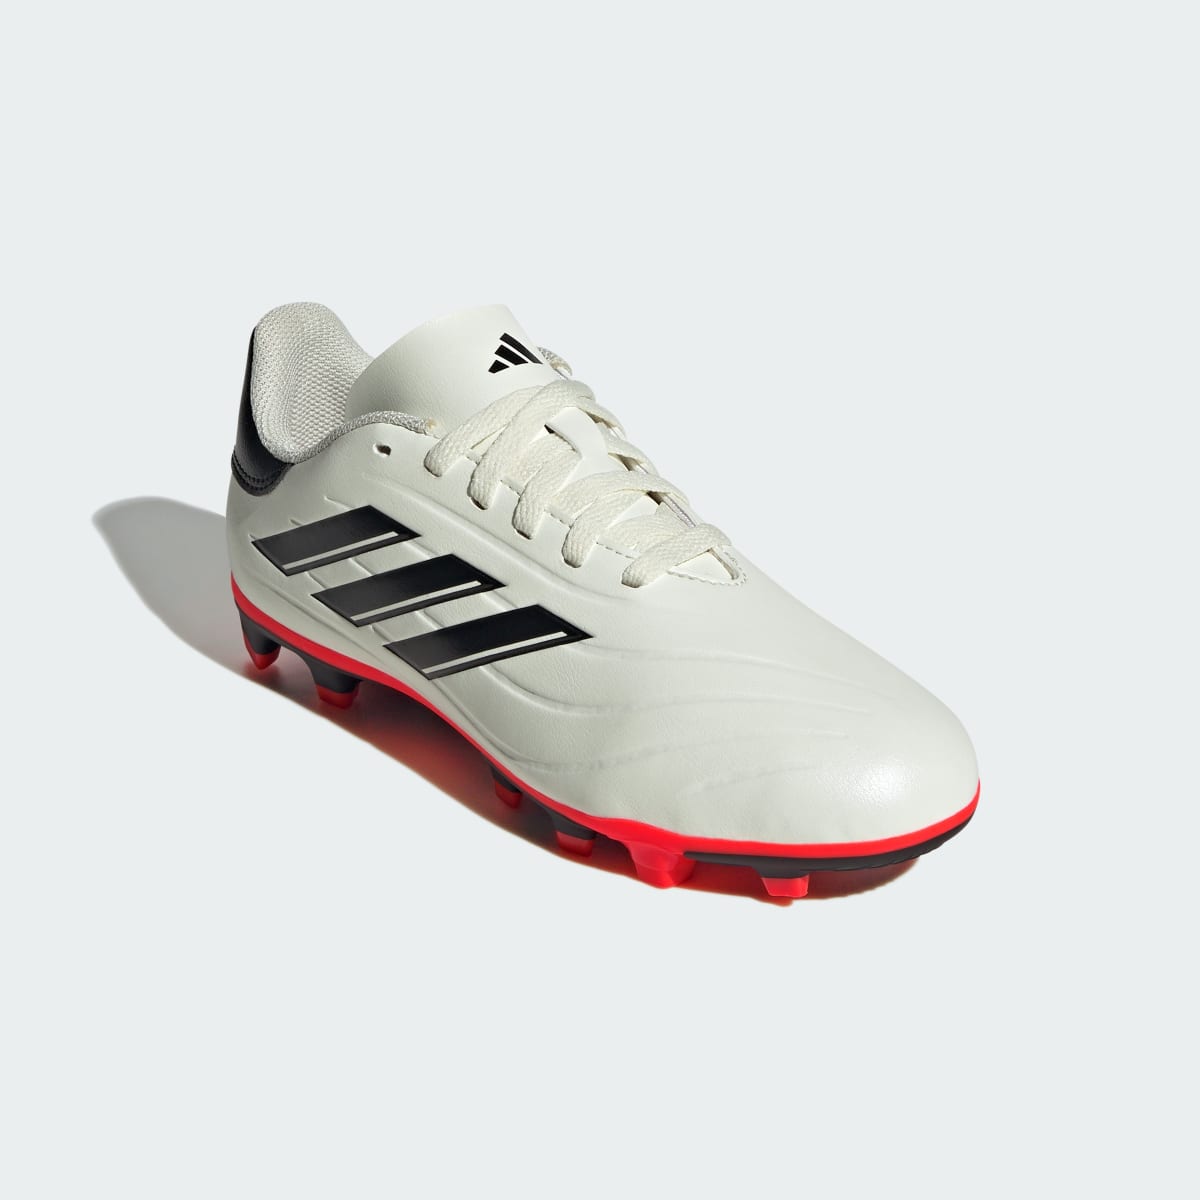 Adidas Chaussure Copa Pure II Club Multi-surfaces. 5